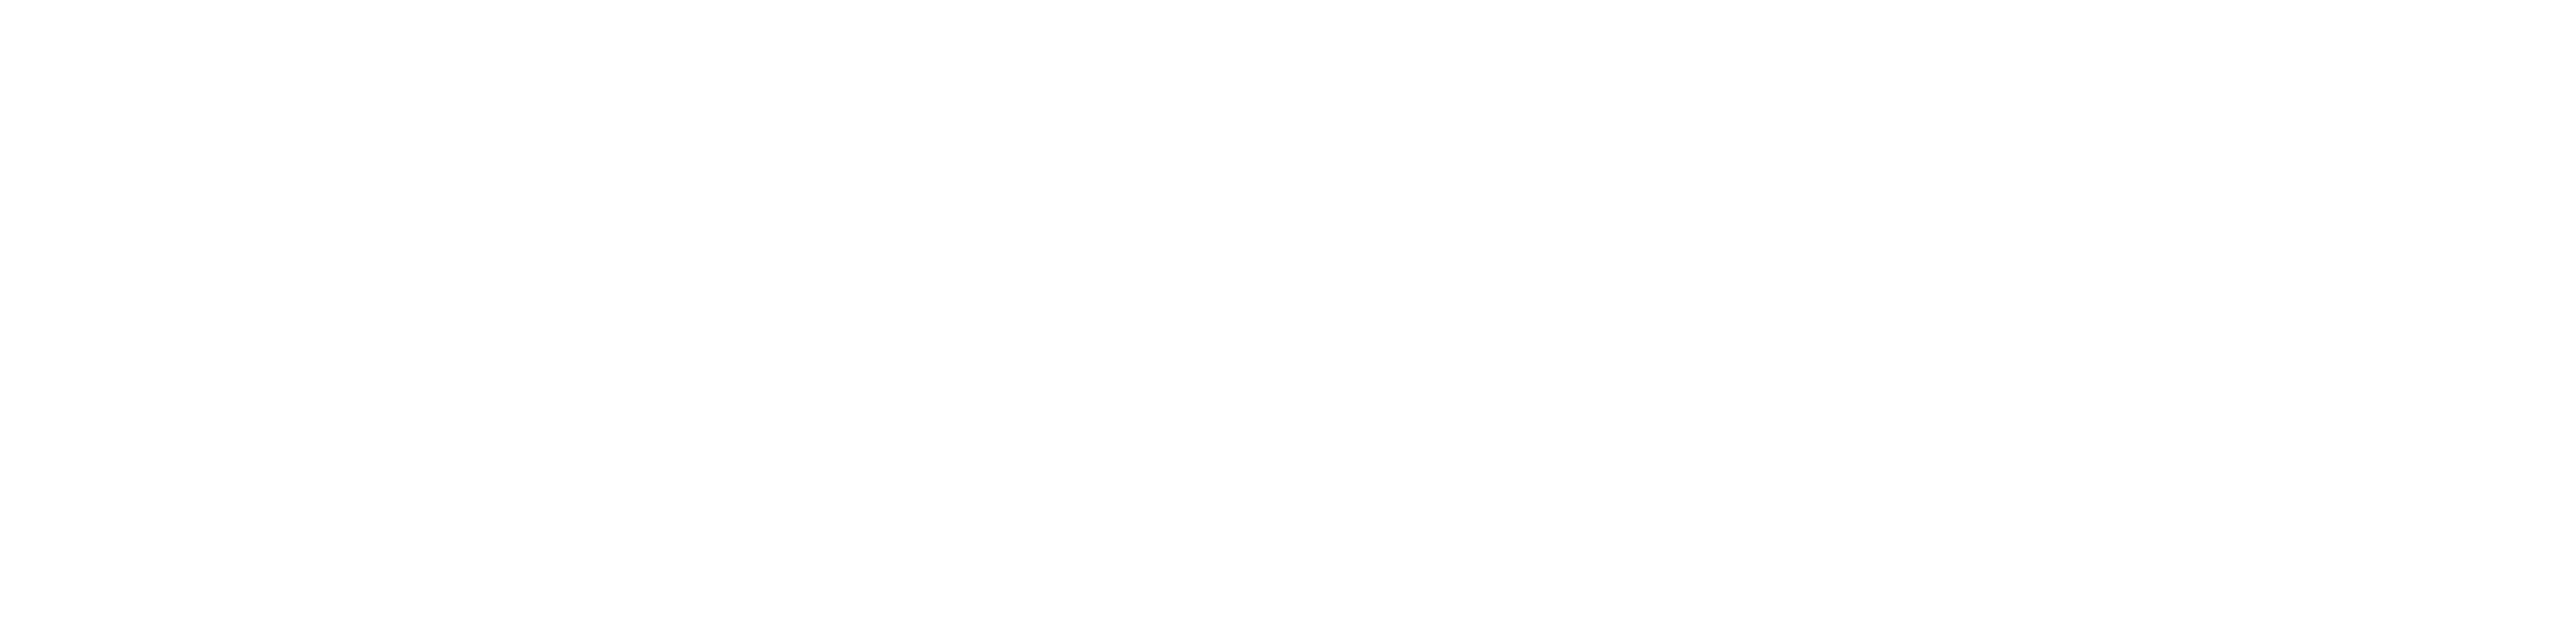 Kubic Business Consulting